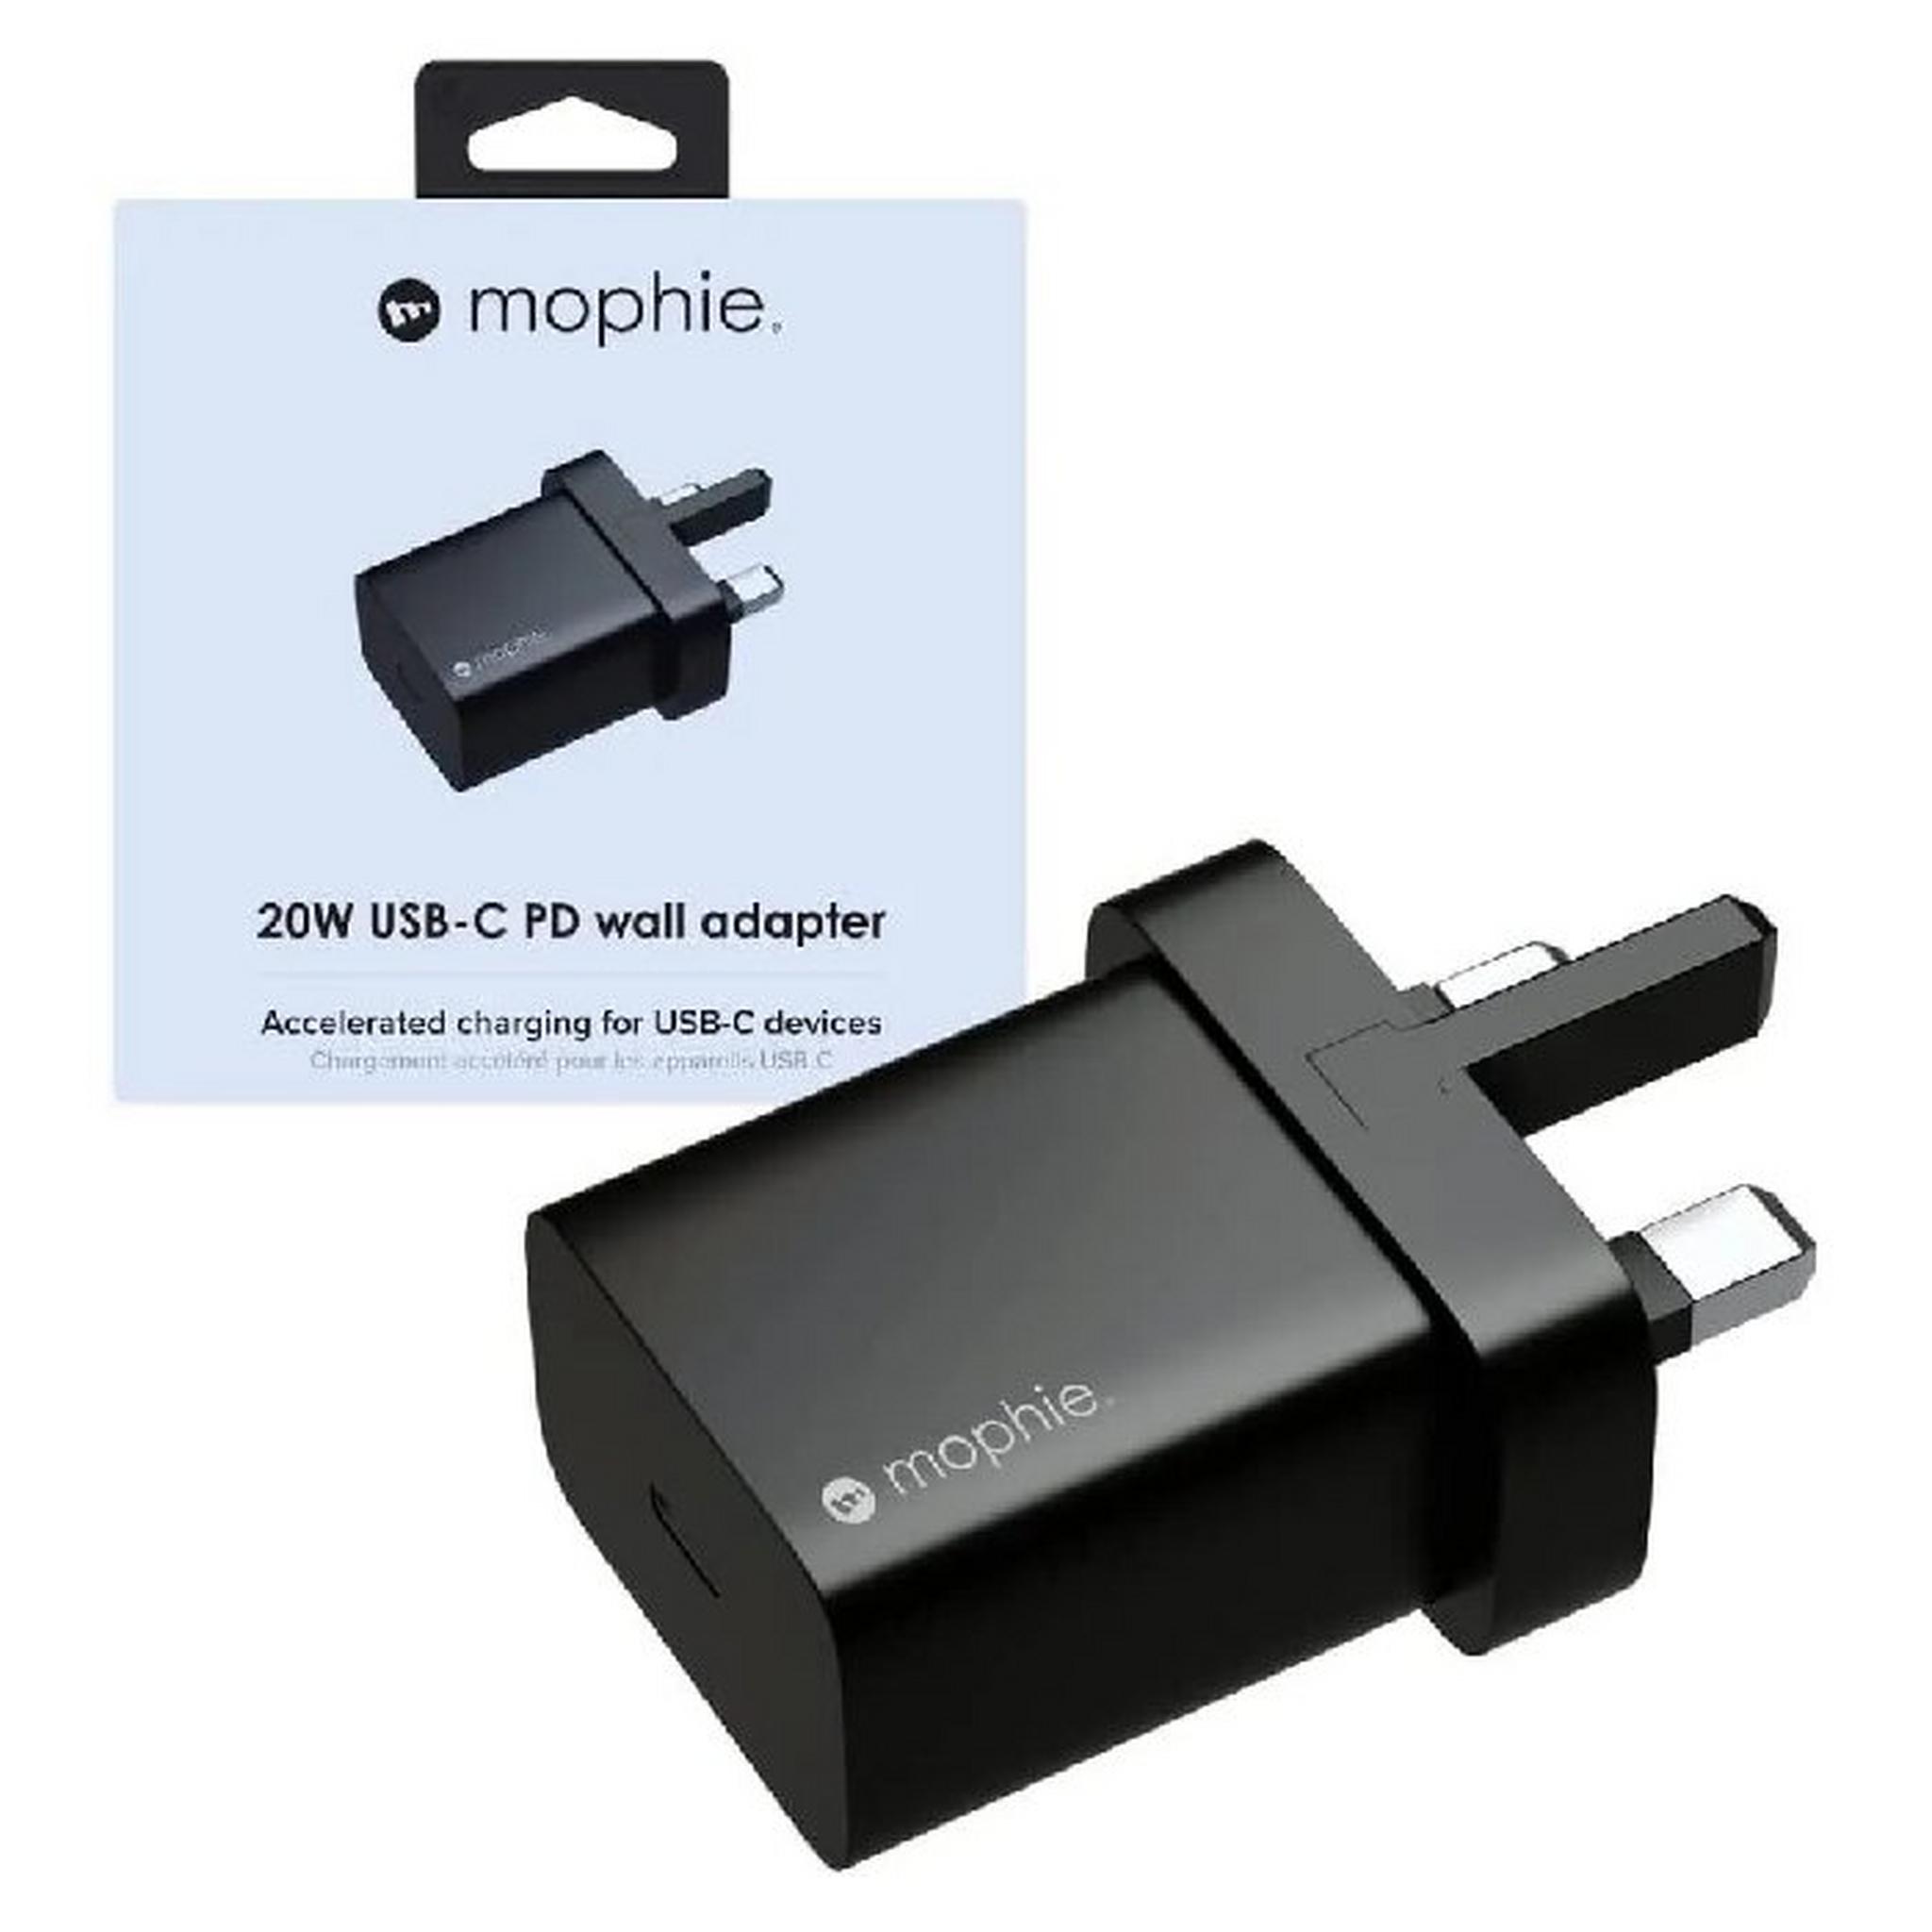 Mophie Fast Charging Mains Adapter with USB-C PD, 20W, 409907456 – Black